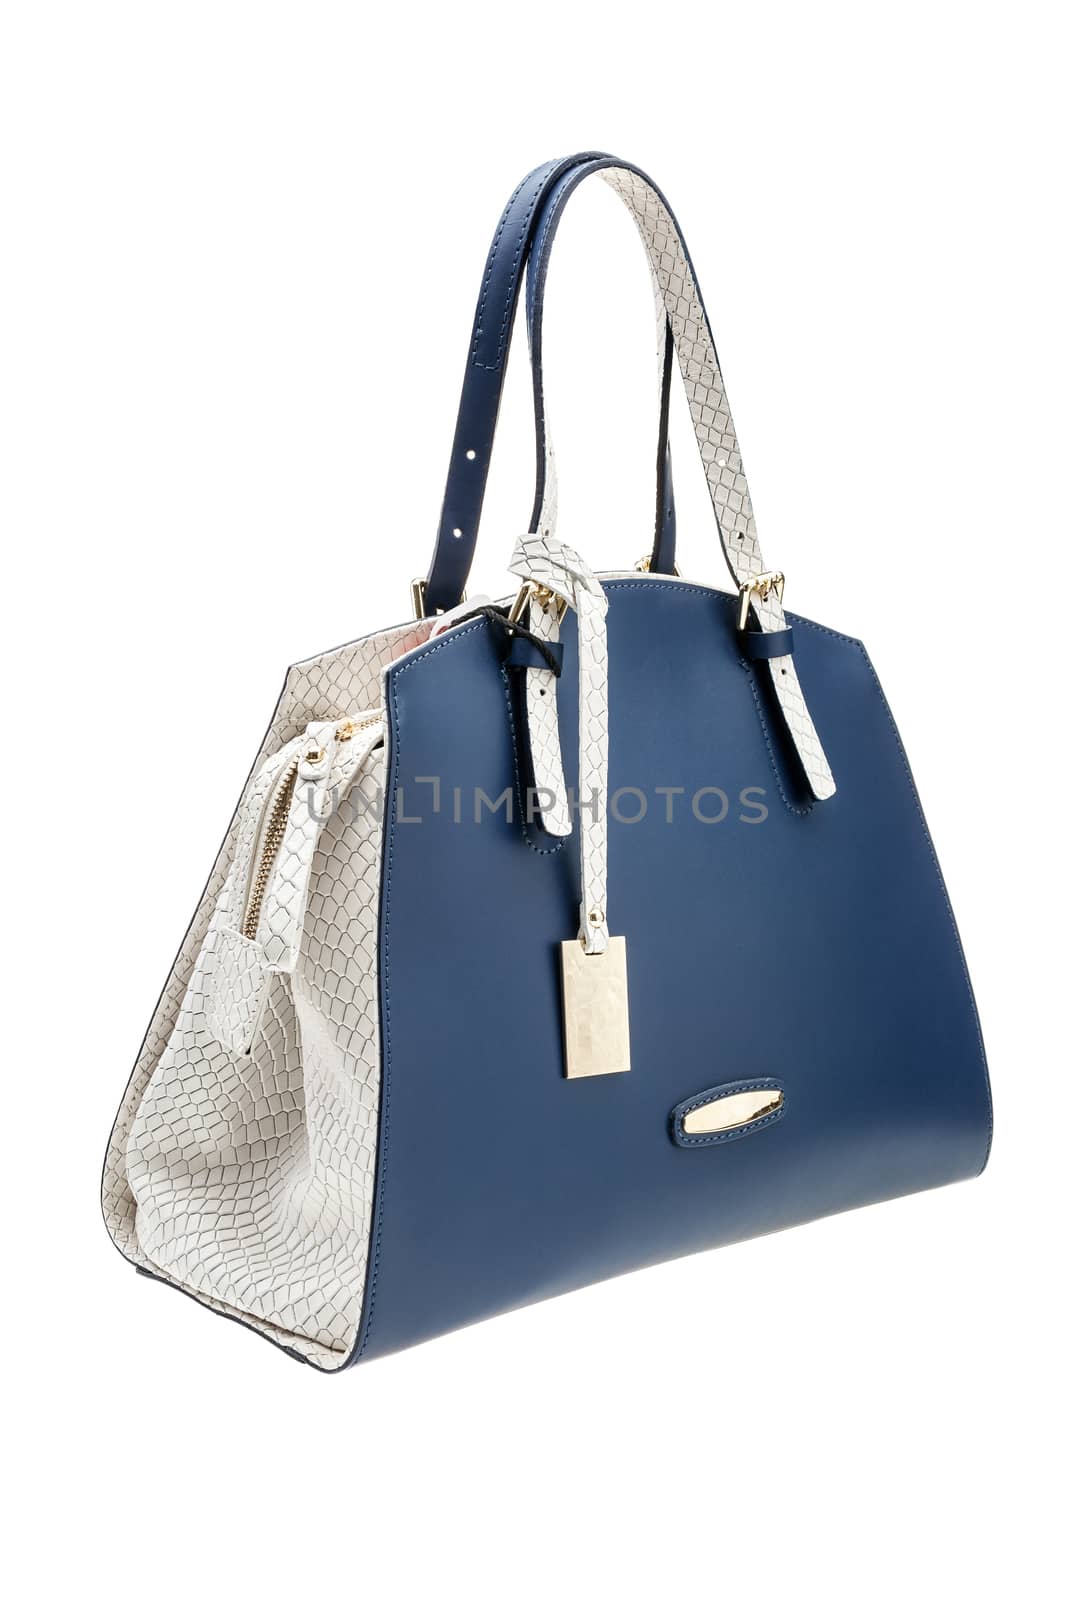 New blue and white womens bag isolated on white background.